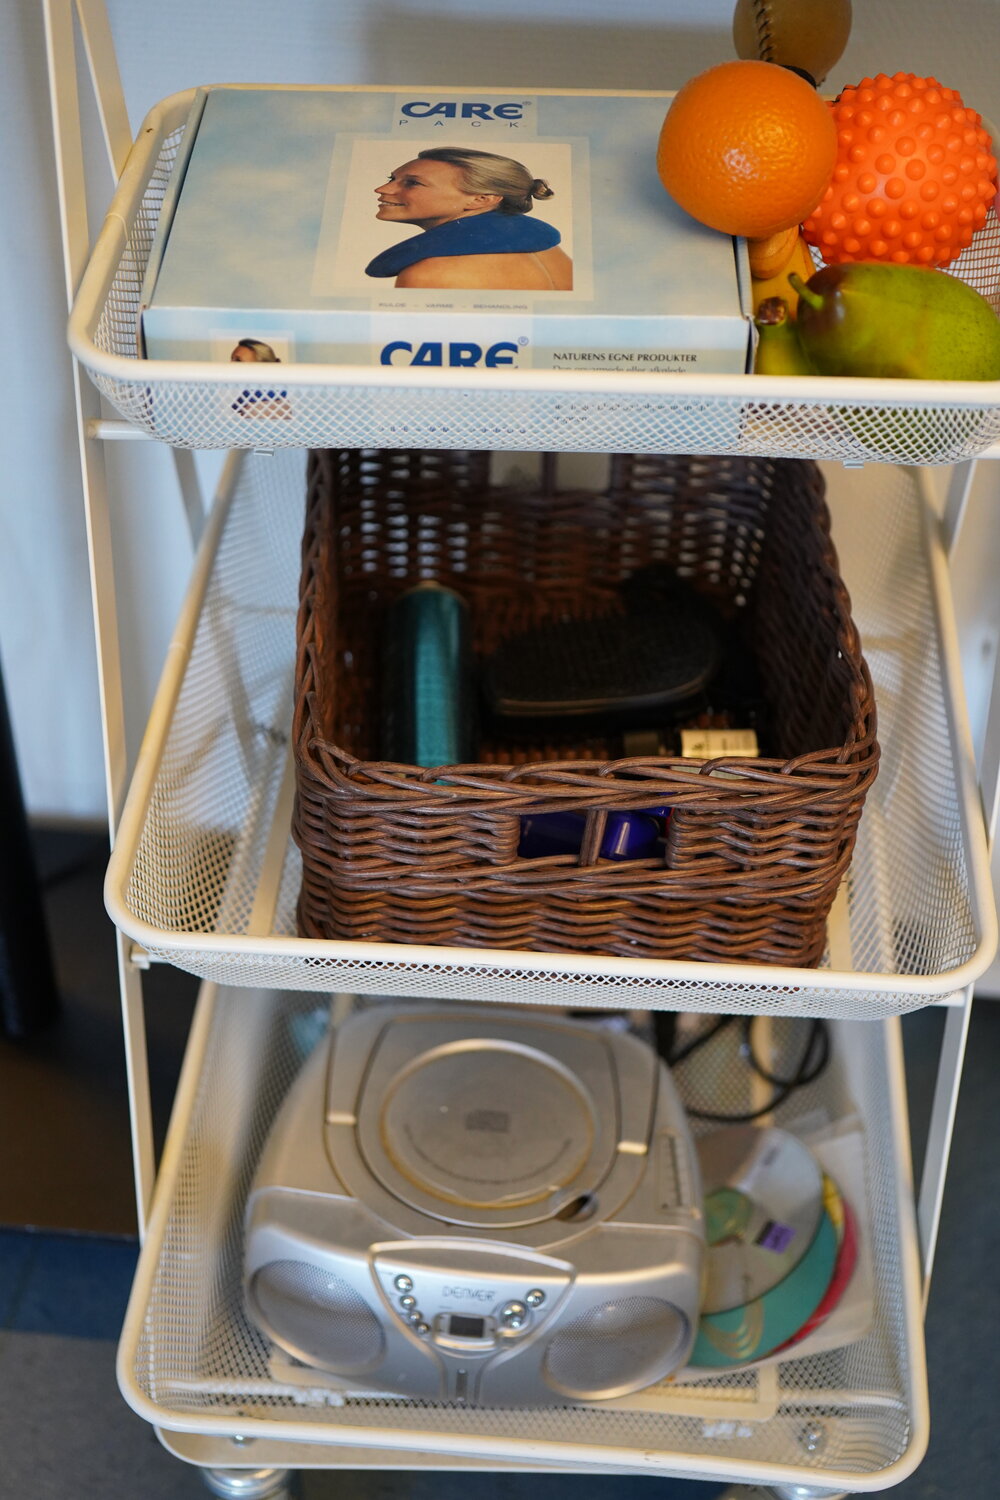 A cart in the staff room, which contains massagers, rollers, etc. for use by the residents and staff